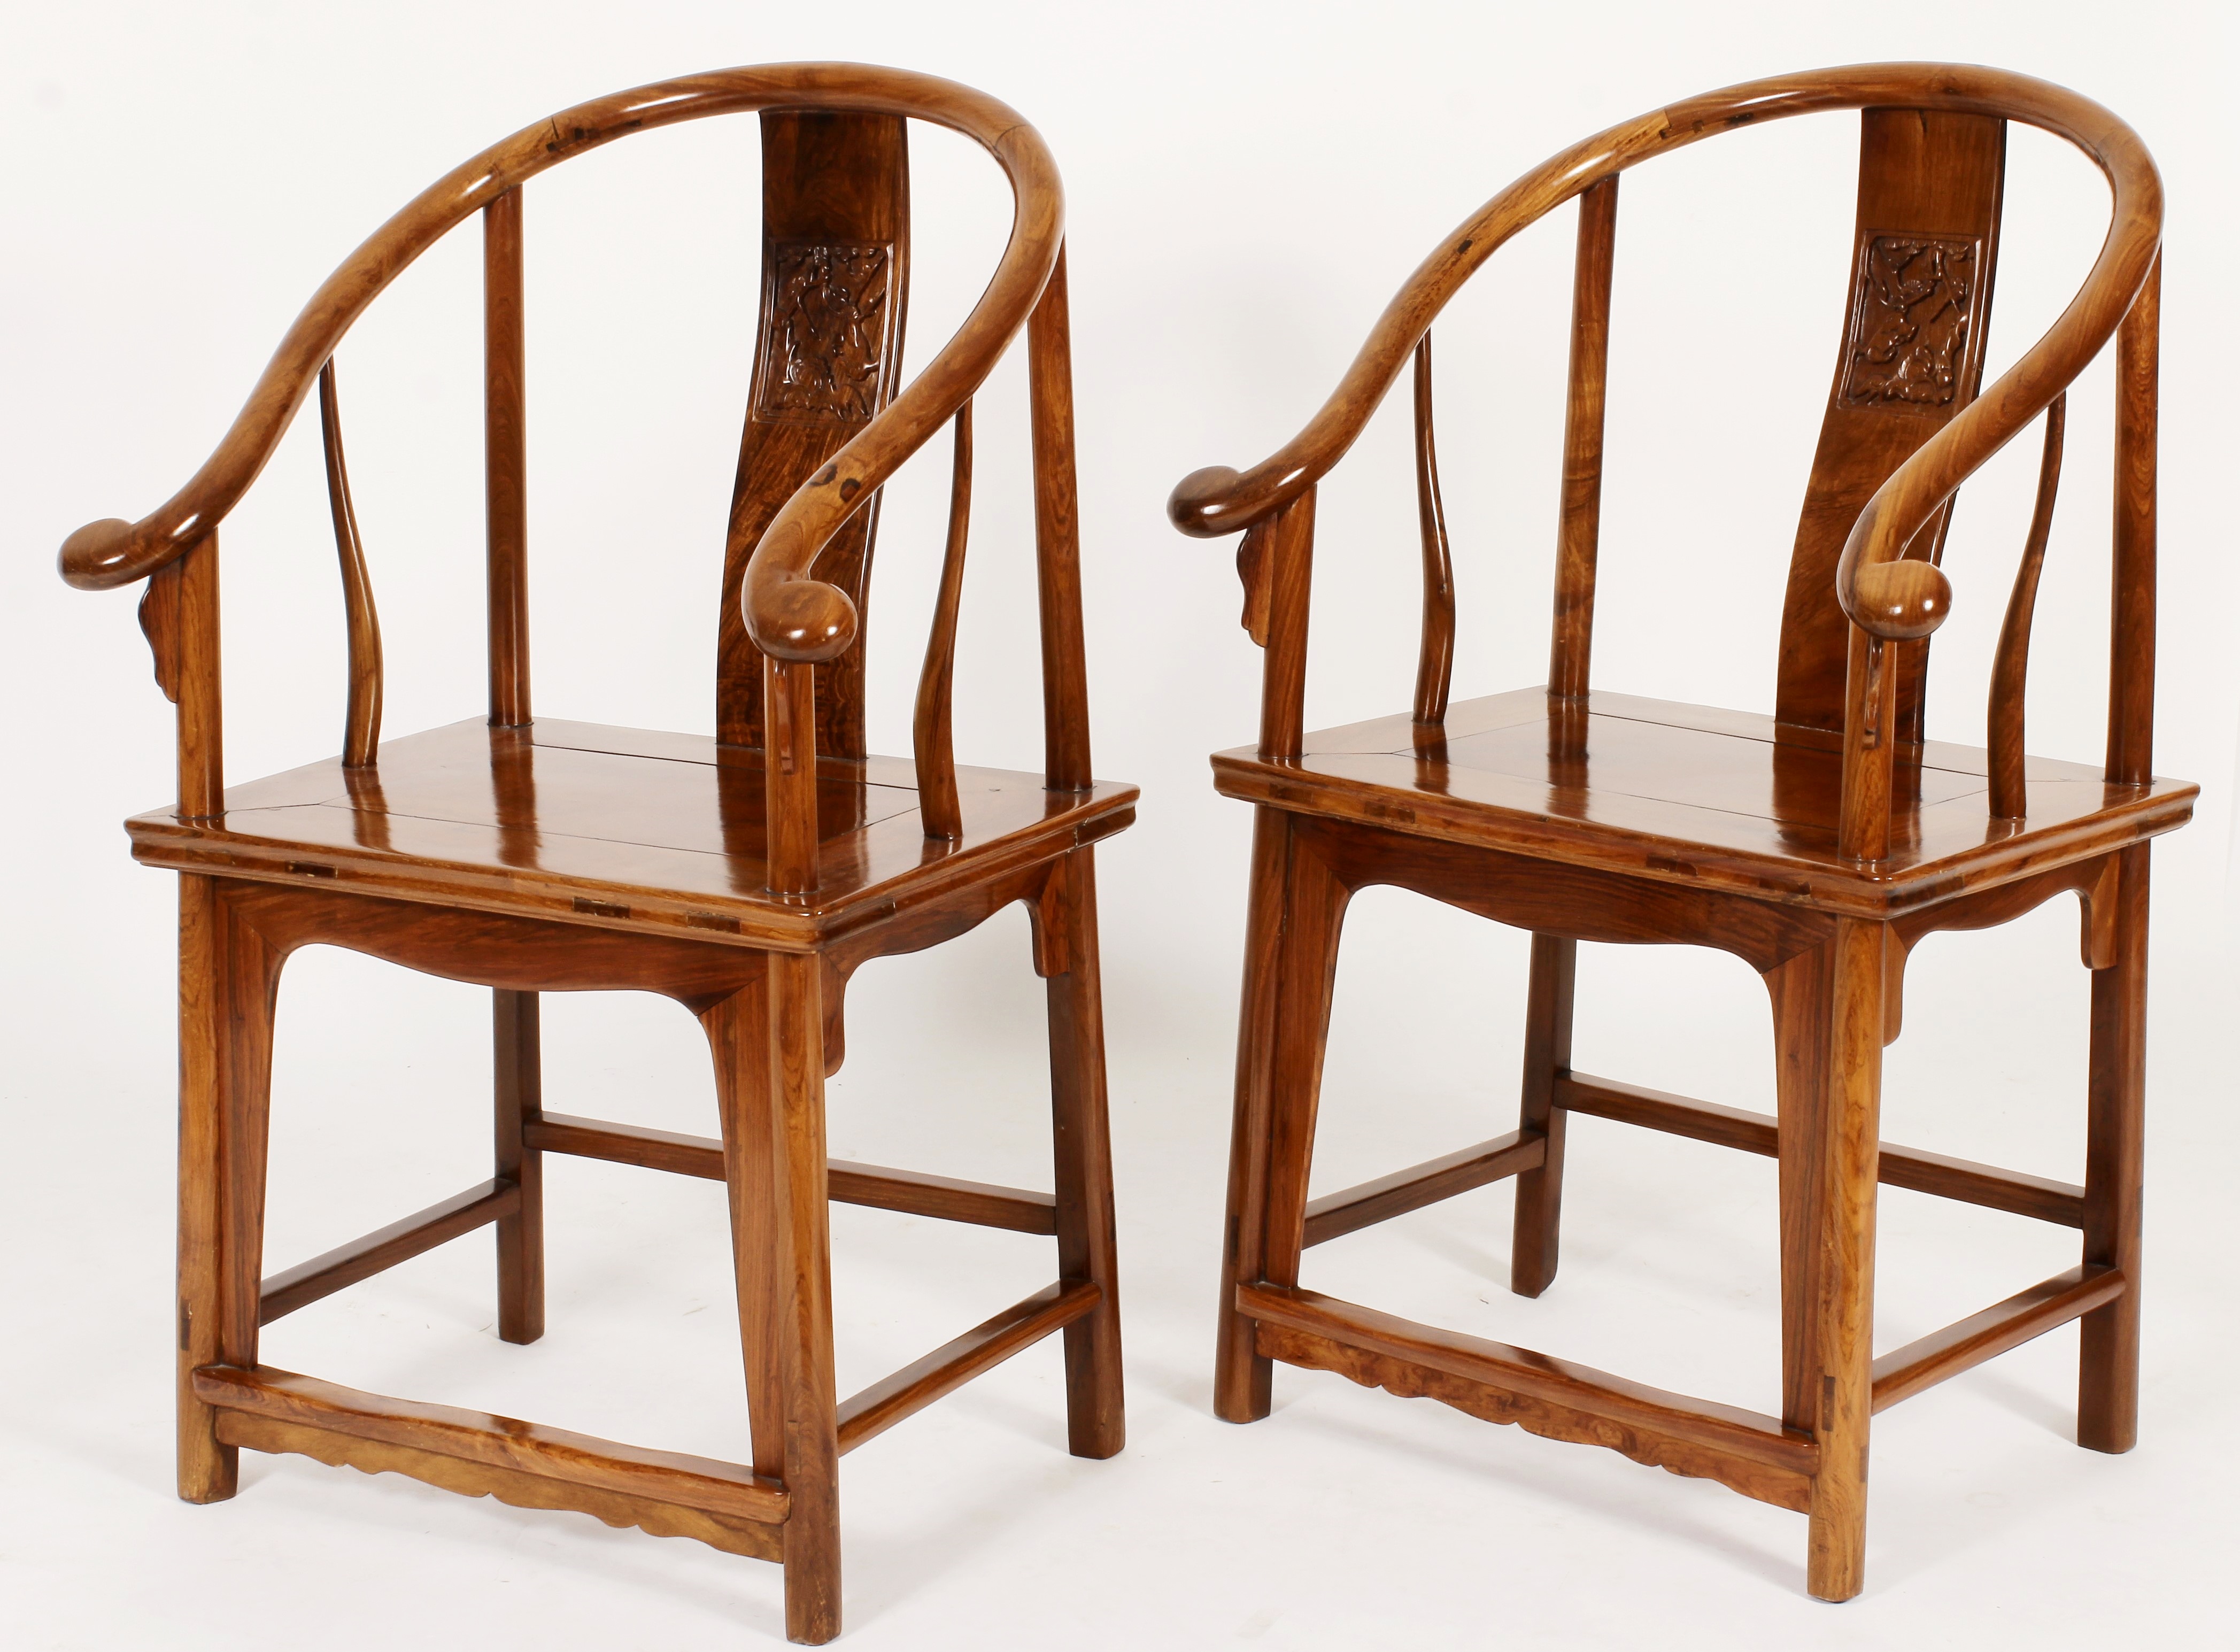 Pair Of Ming Style Horseshoe Back Arm Chairs. Sold For $18,750